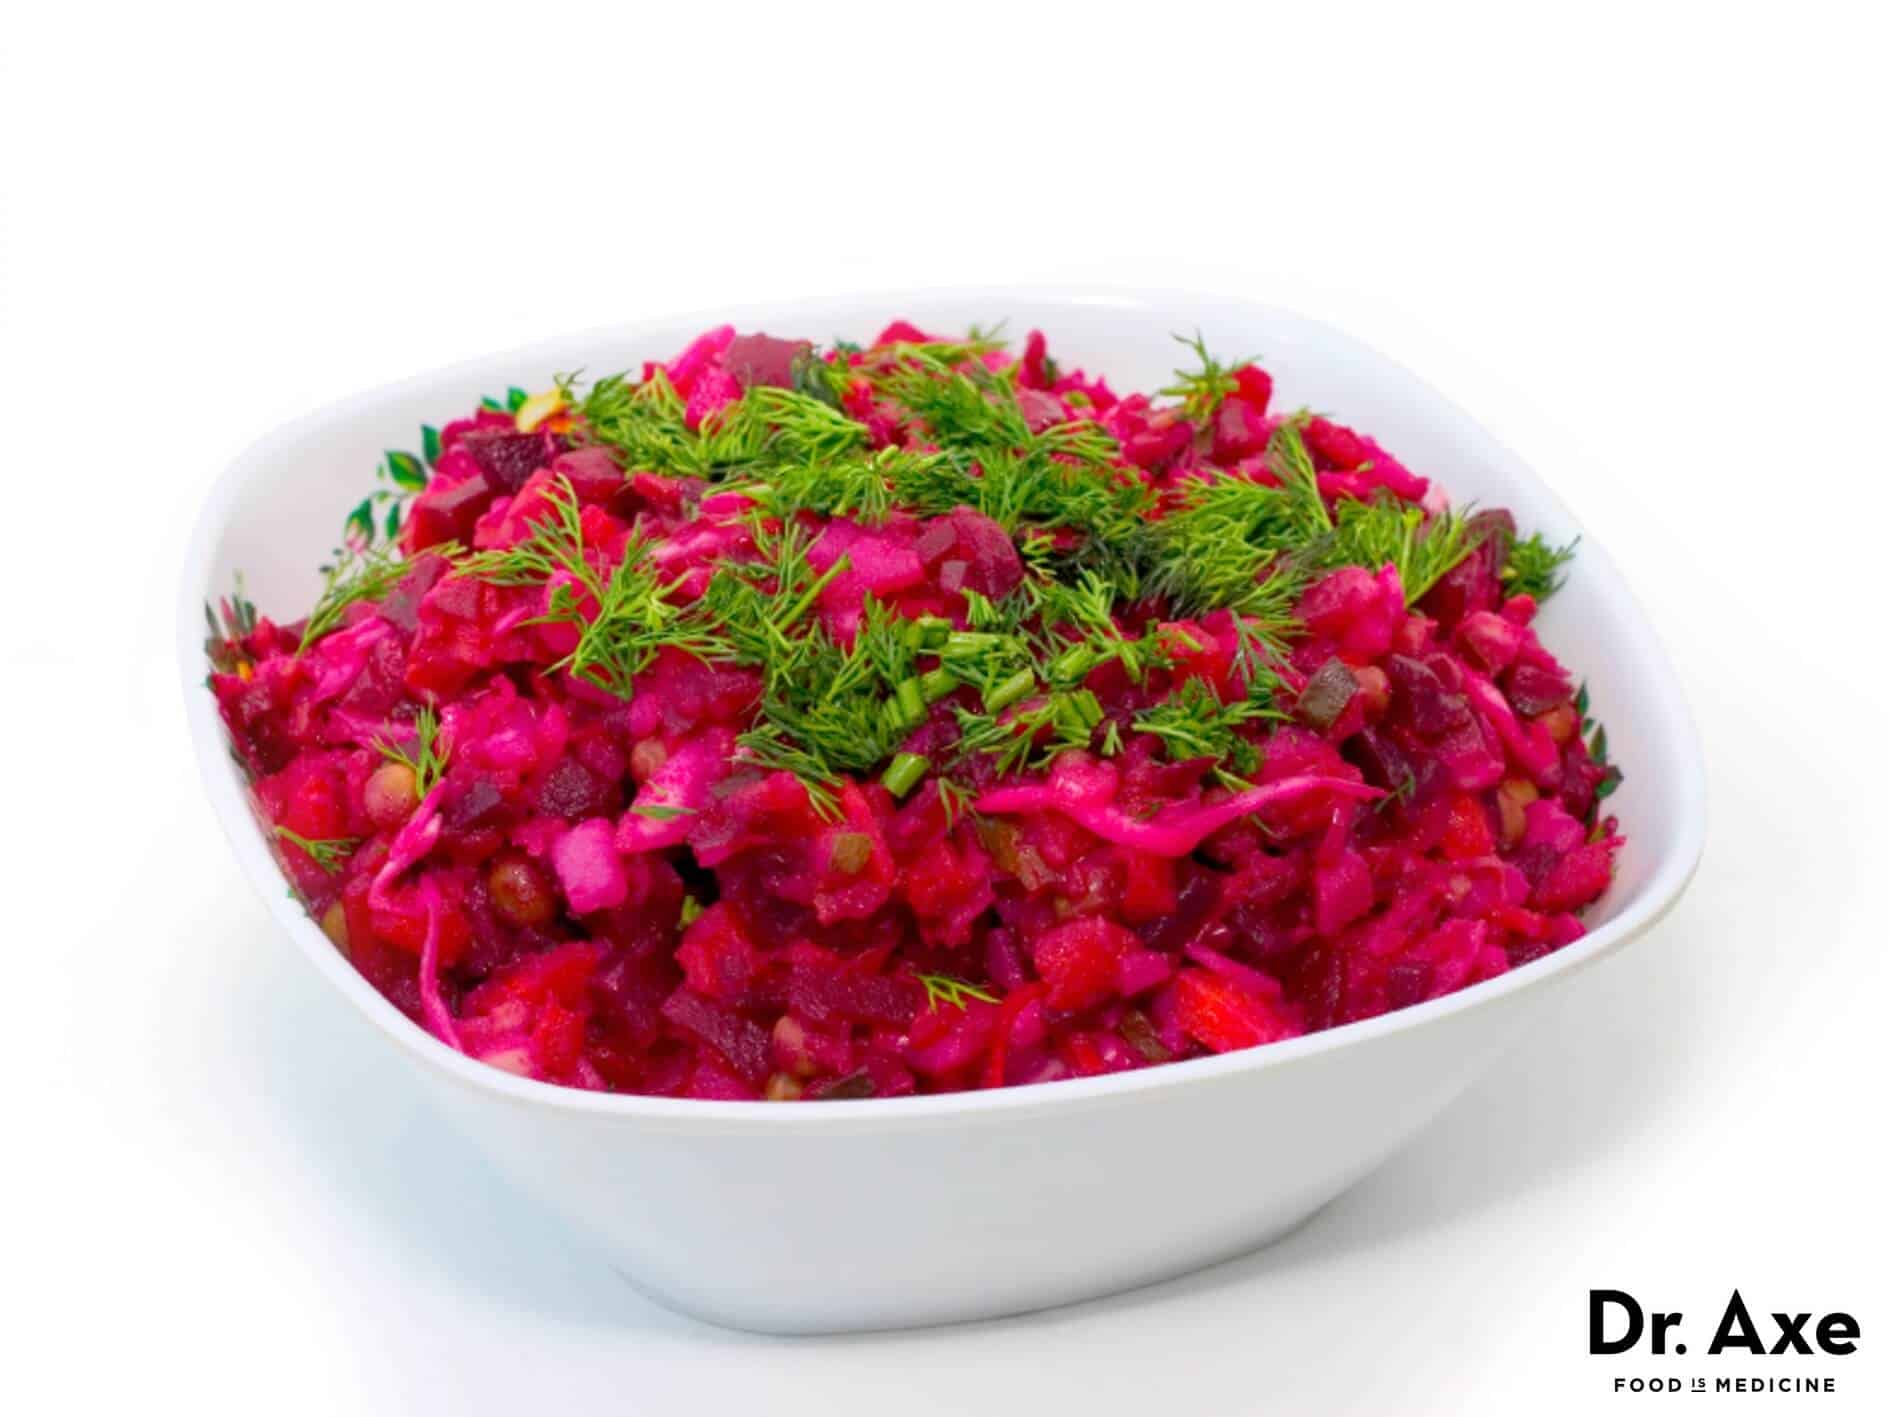 Beet salad with edible flowers recipe - Dr. Axe